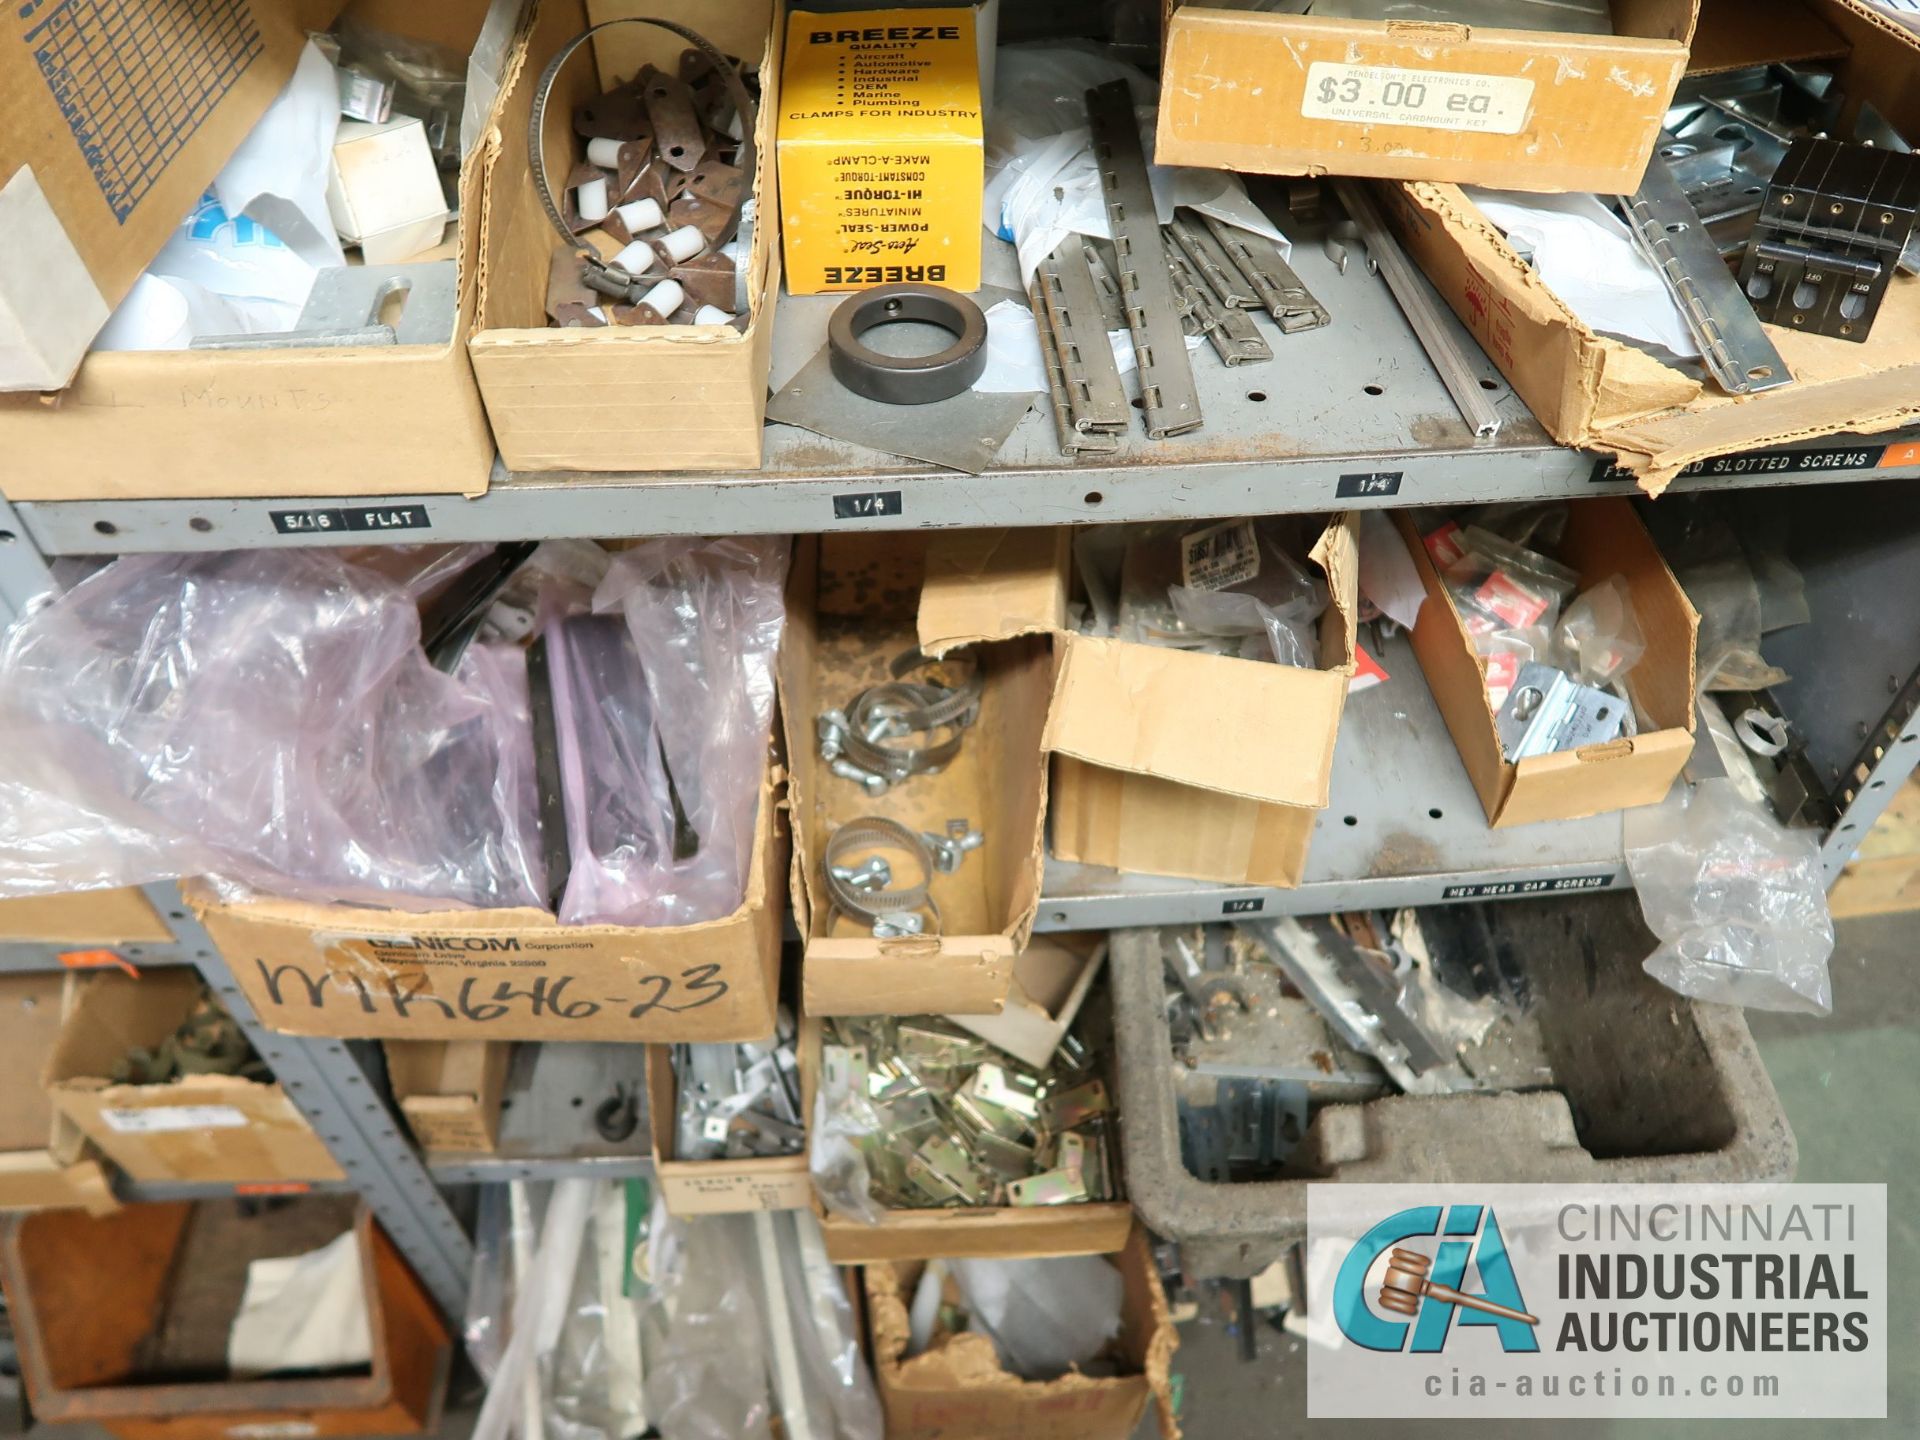 CONTENTS OF (7) SHELVES INCLUDING MISCELLANEOUS BRACKETS, CLAMPS, HINGES **NO SHELVES** - Image 17 of 19